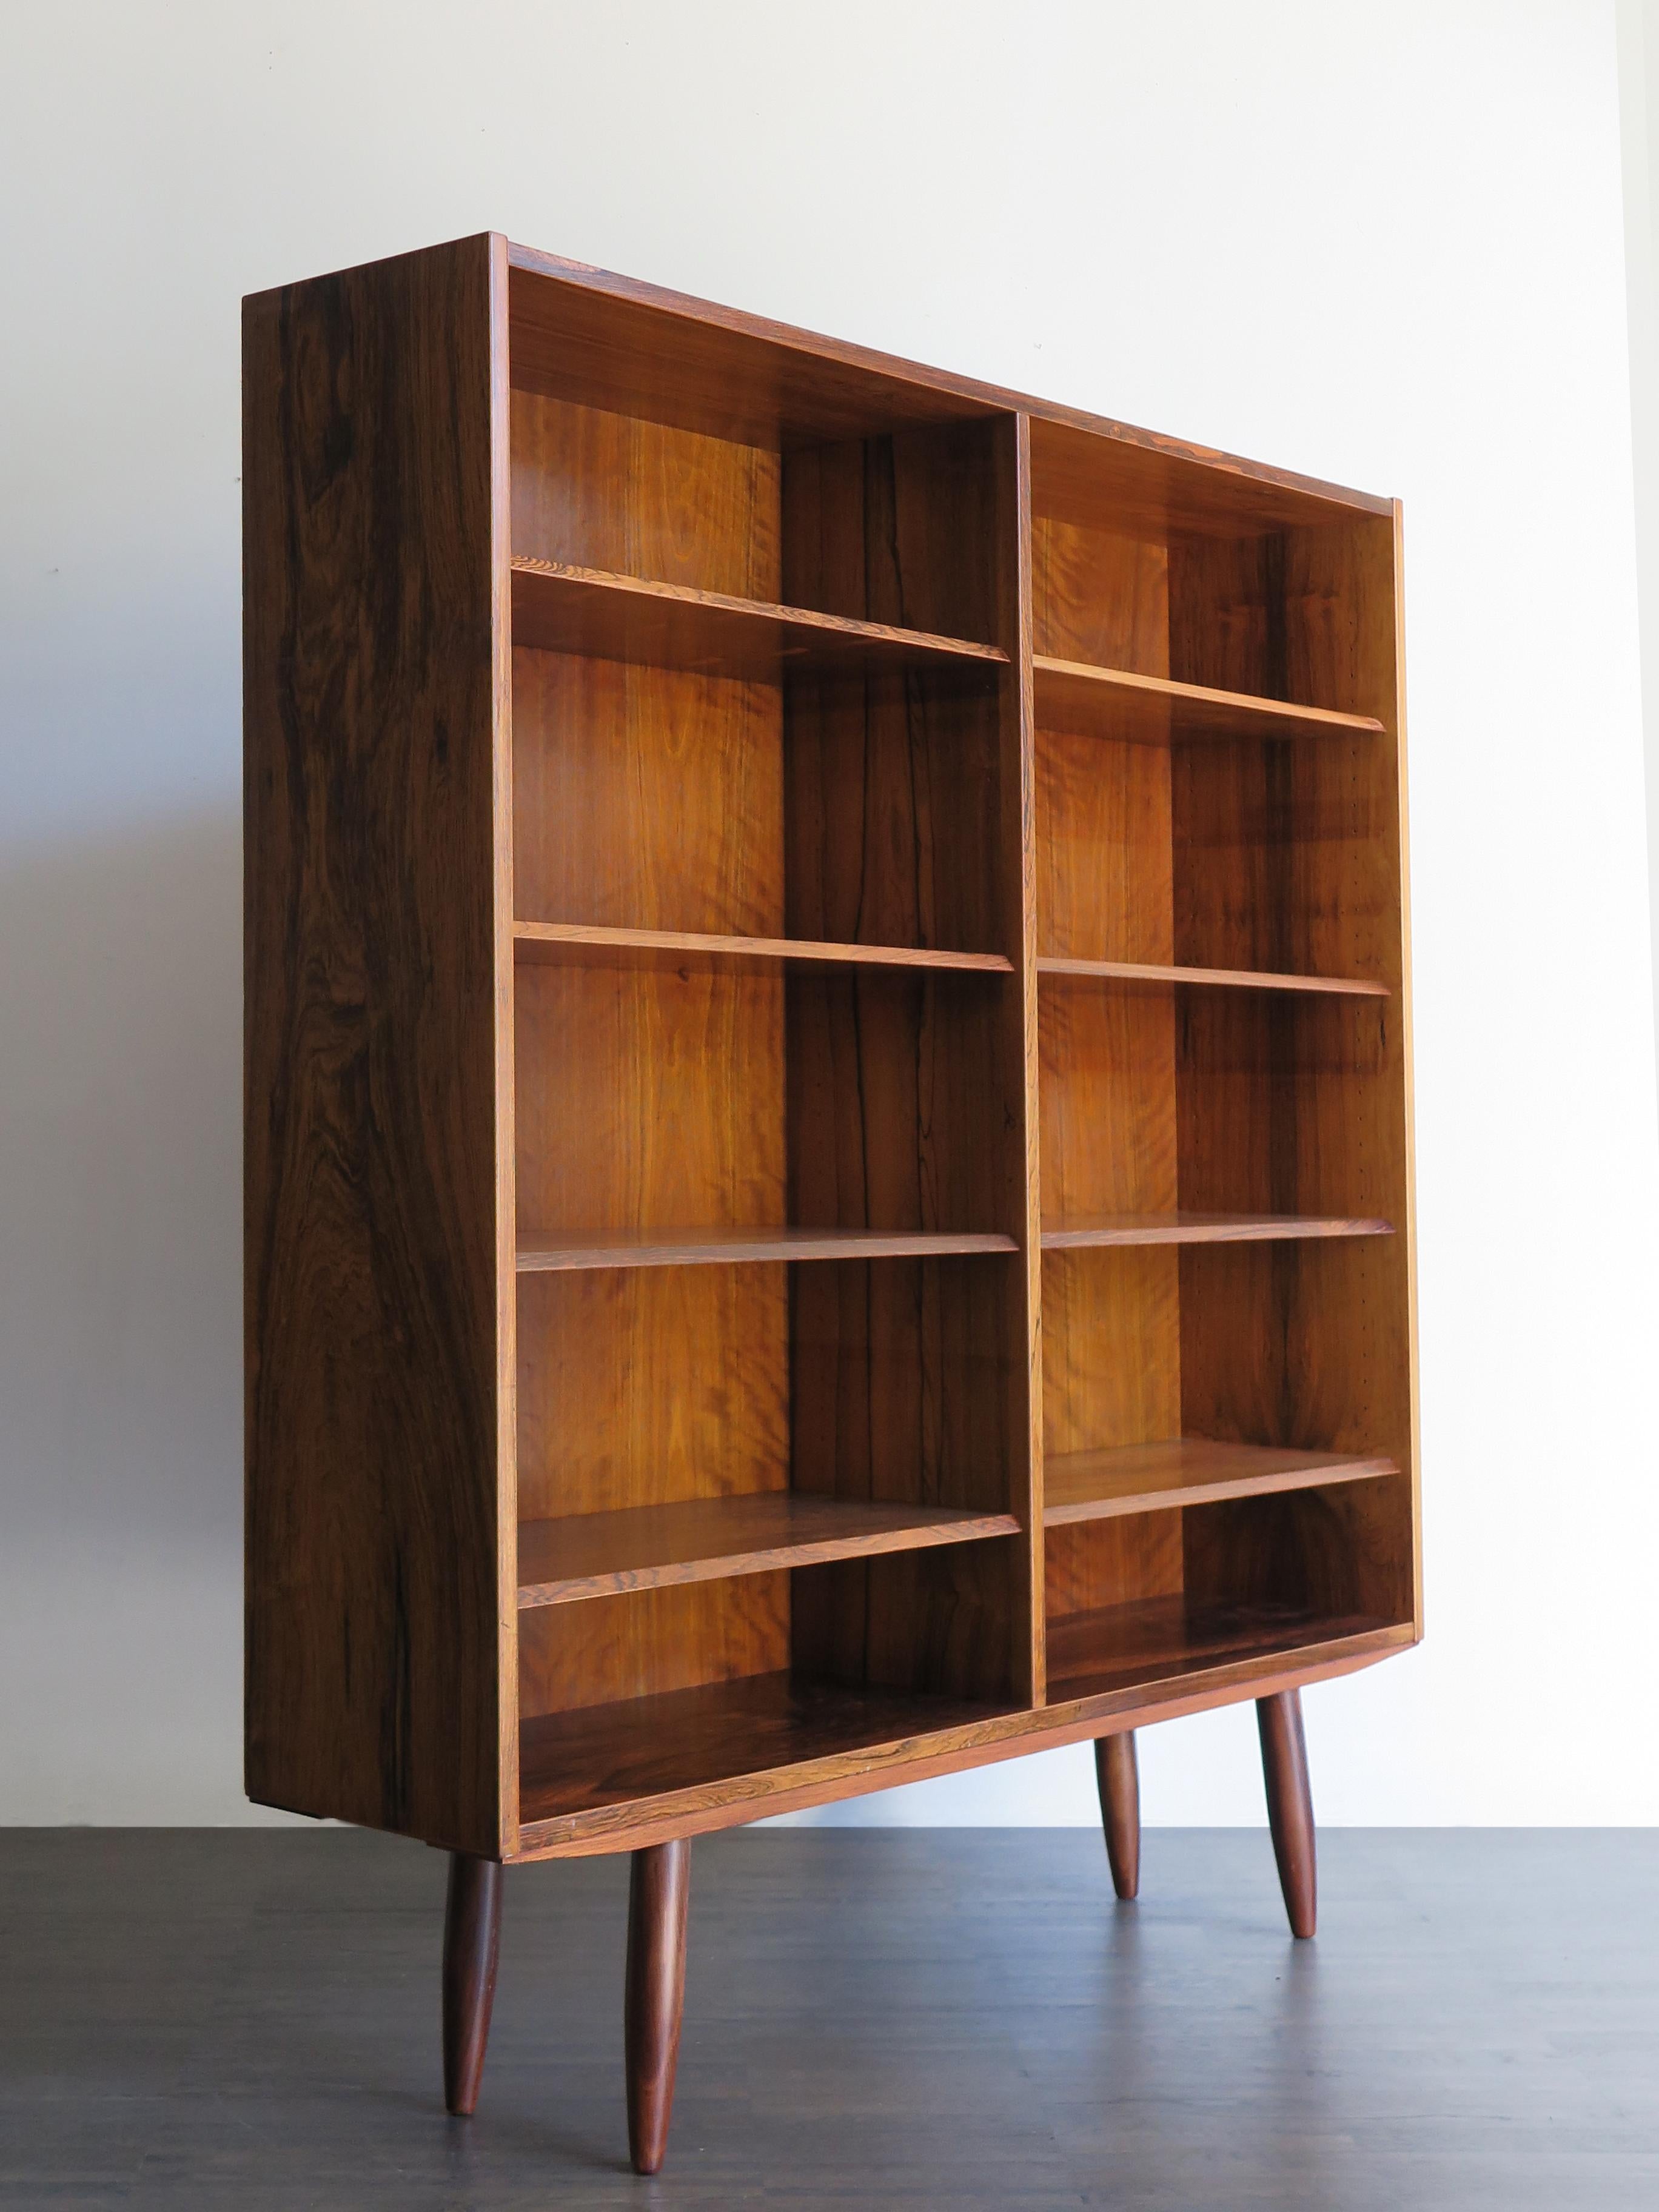 Scandinavian Mid-Century Modern dark wood bookcase by Poul Hundevad for Hundevad & Co with height adjustable shelves, circa 1960s.

Please note that the item is original of the period and this shows normal signs of age and use.